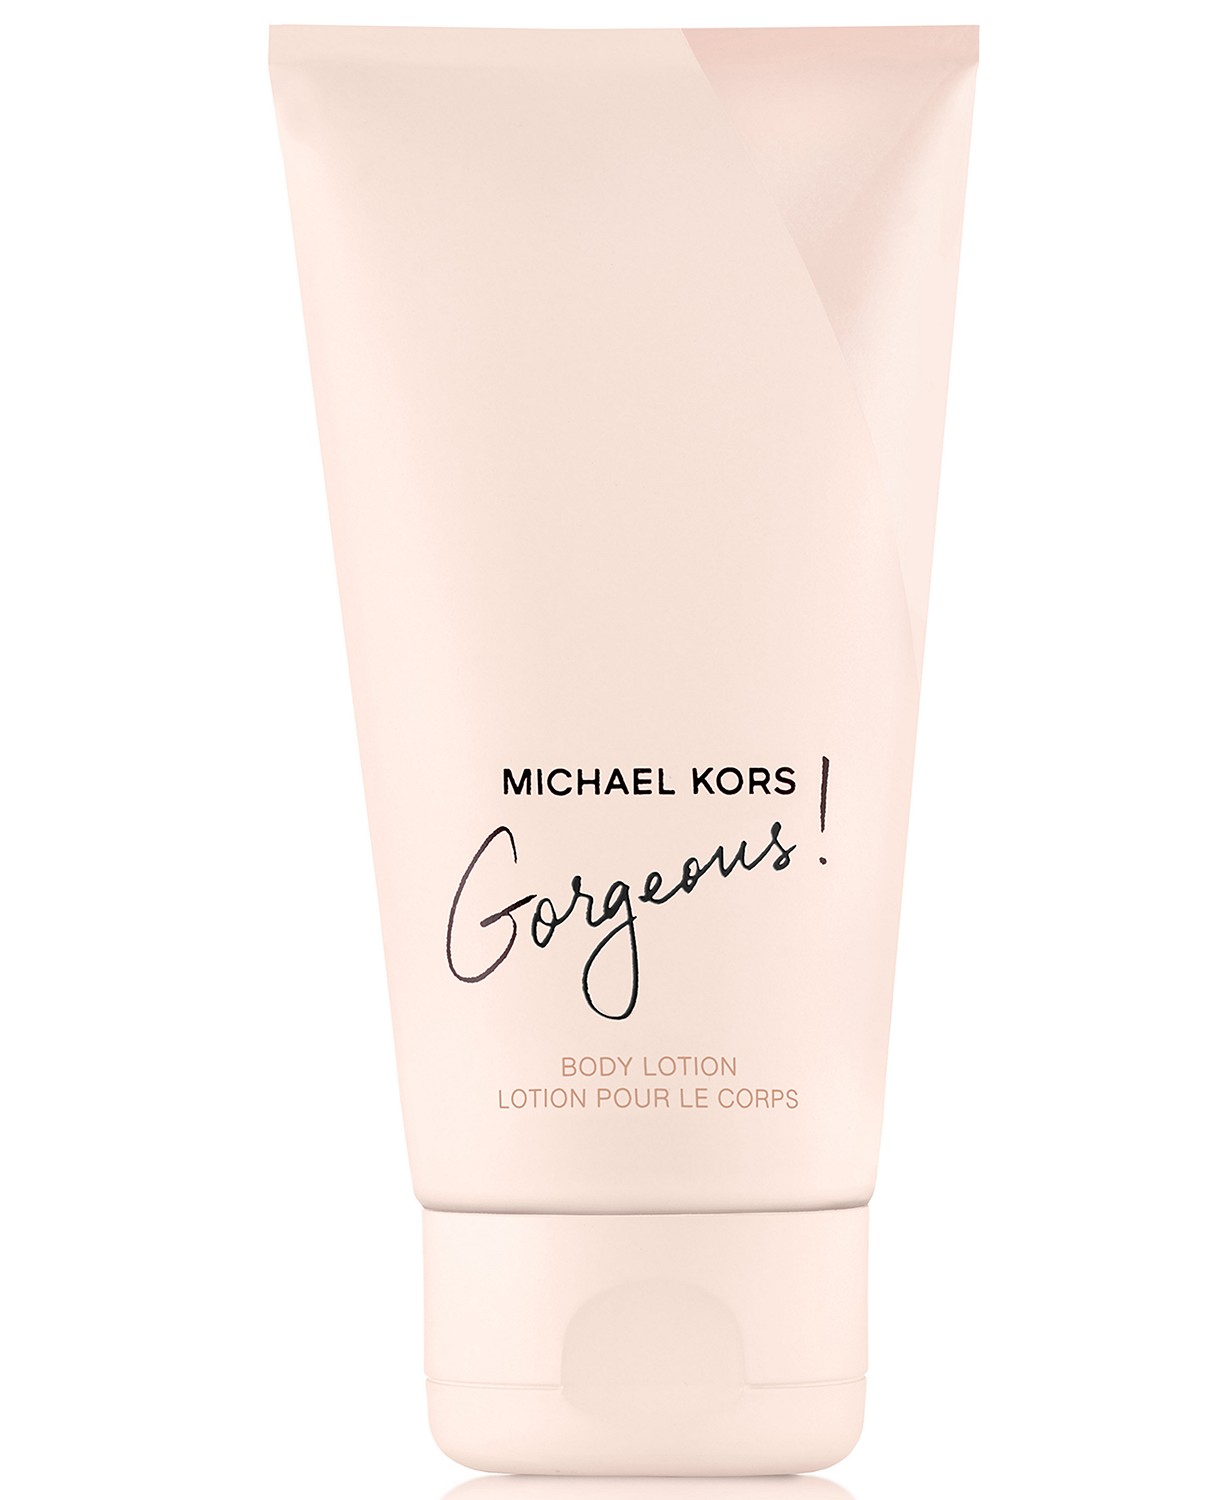 Receive a Free Body Lotion with any large spray purchase from the Michael Kors Gorgeous! Fragrance Collection